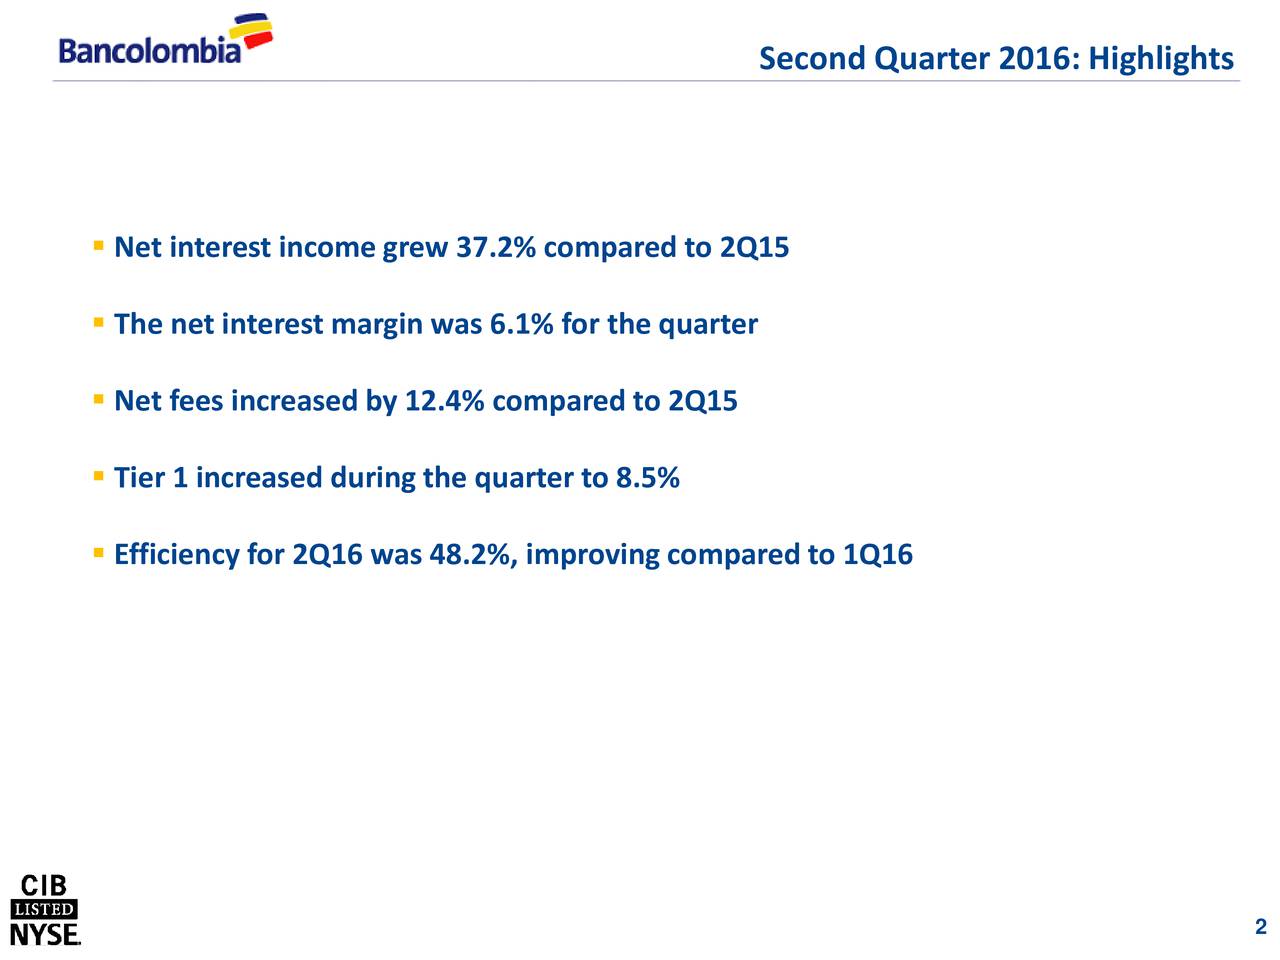 Net interest income grew 37.2% compared to 2Q15 The net interest margin was 6.1% for the quarter Net fees increased by 12.4% compared to 2Q15 Tier 1 increased during the quarter to 8.5% Efficiency for 2Q16 was 48.2%, improving compared to 1Q16 2